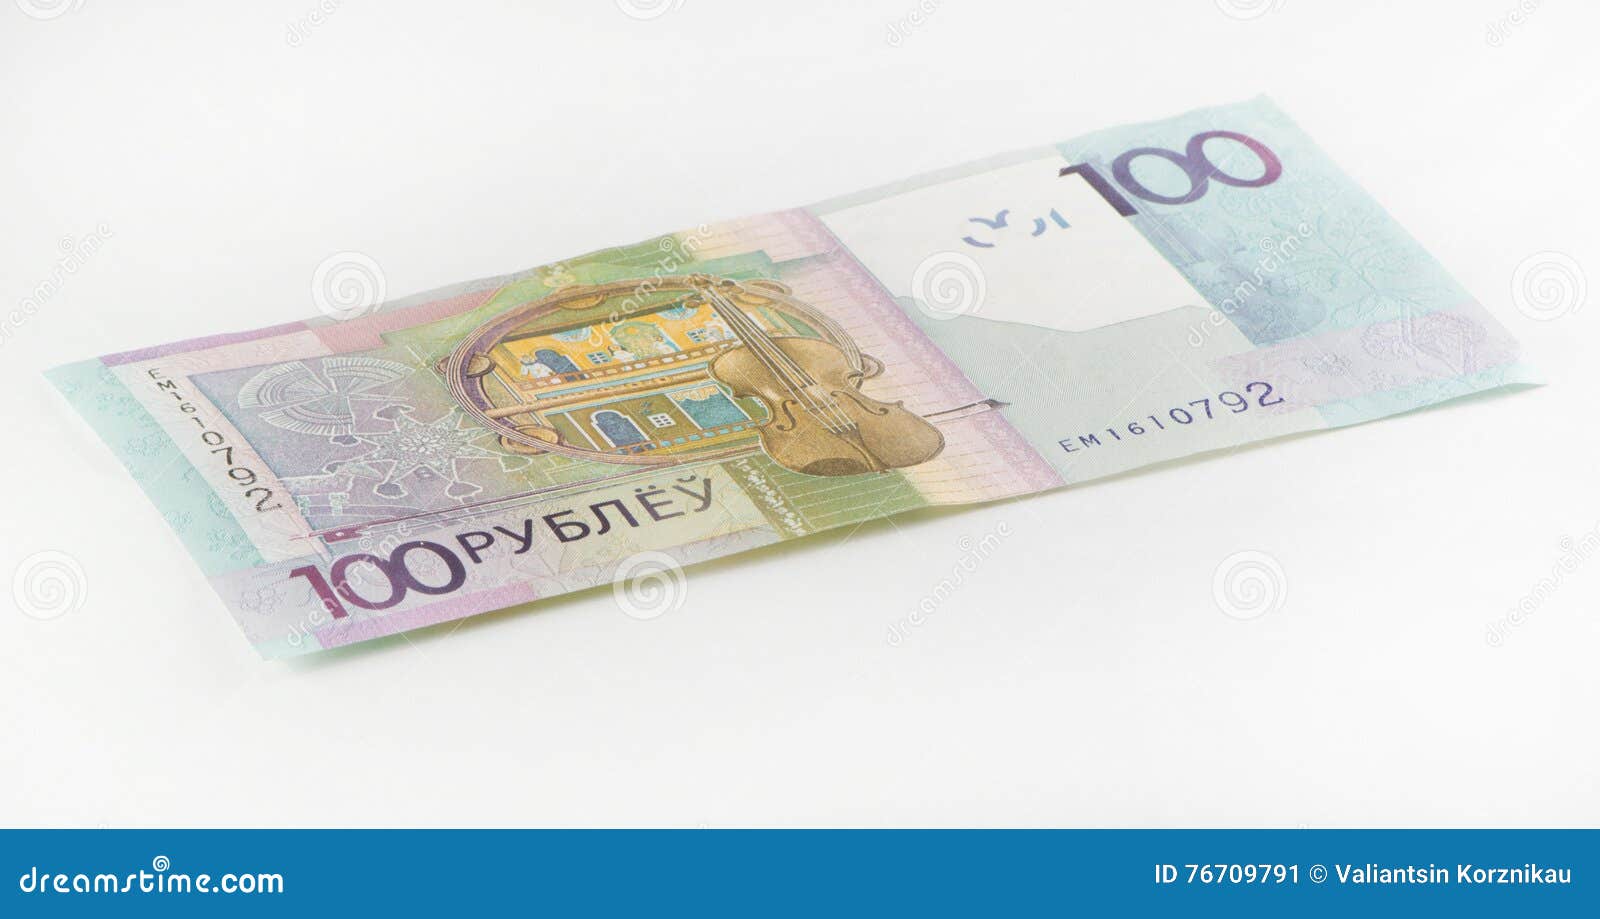 new belarusian hundred roubles